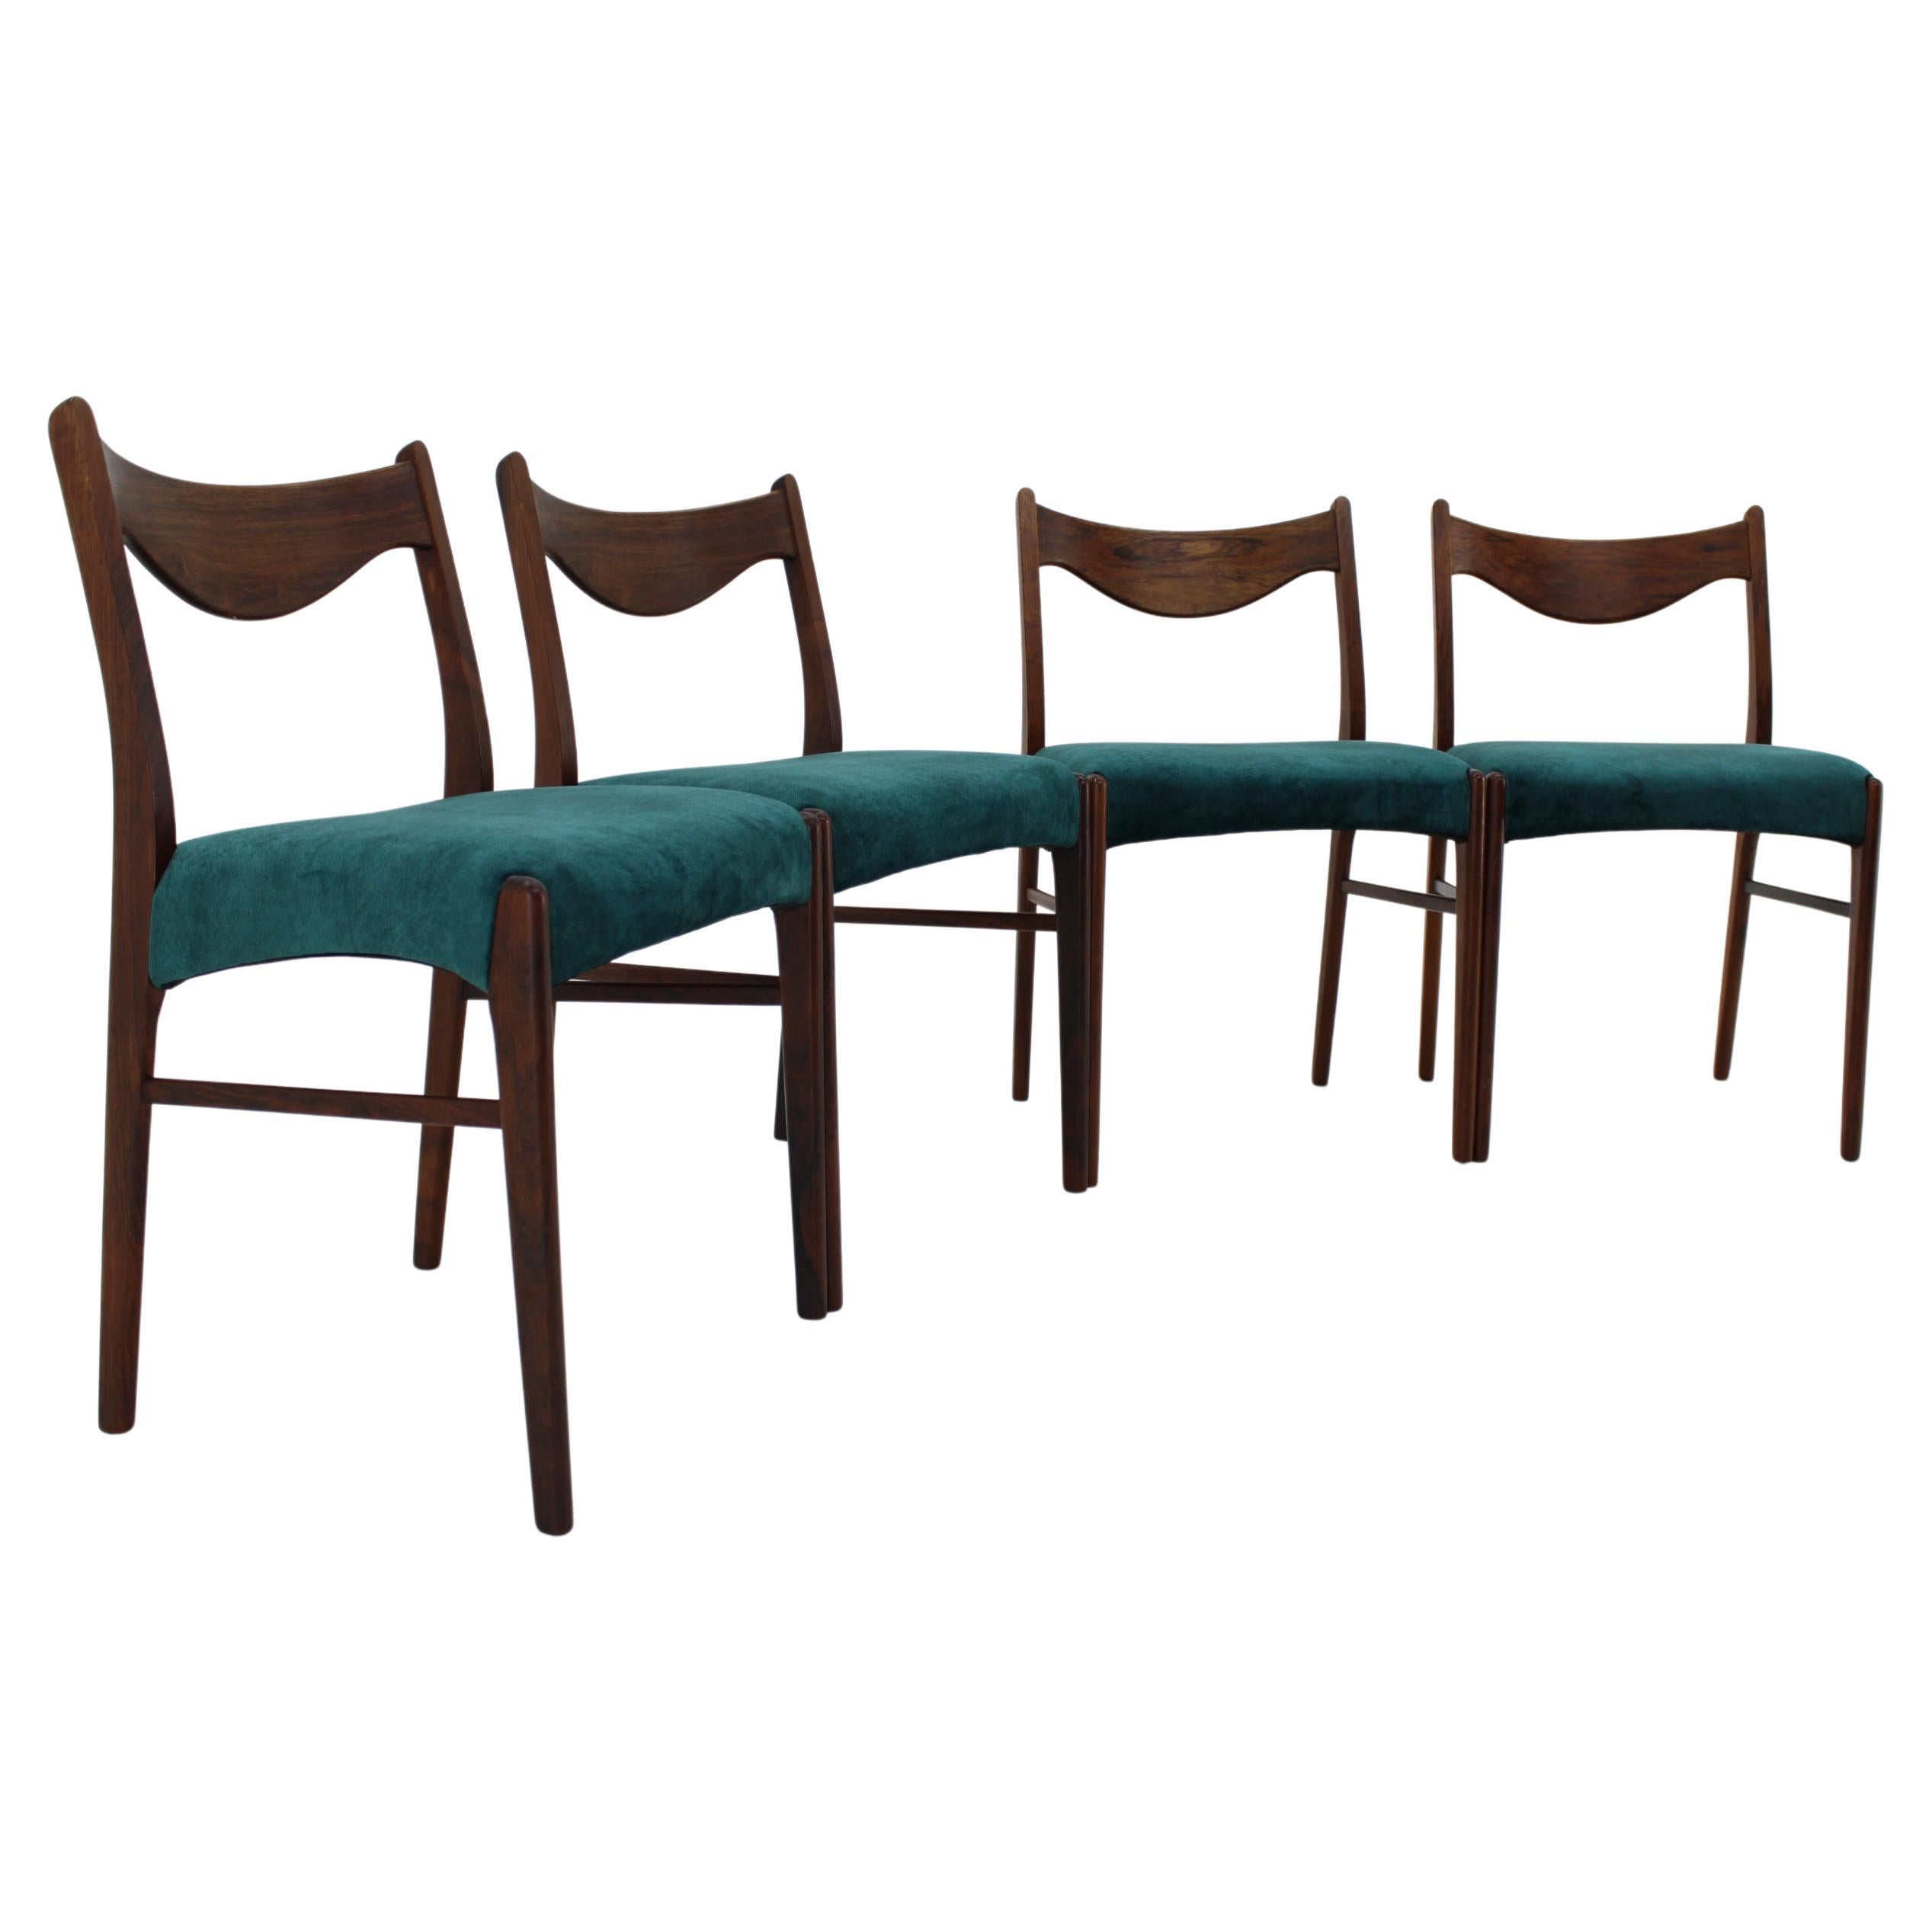 1960s Wahl Iversen Set of Four Dining Chairs for Glyngøre Stolefabrik, Denmark For Sale